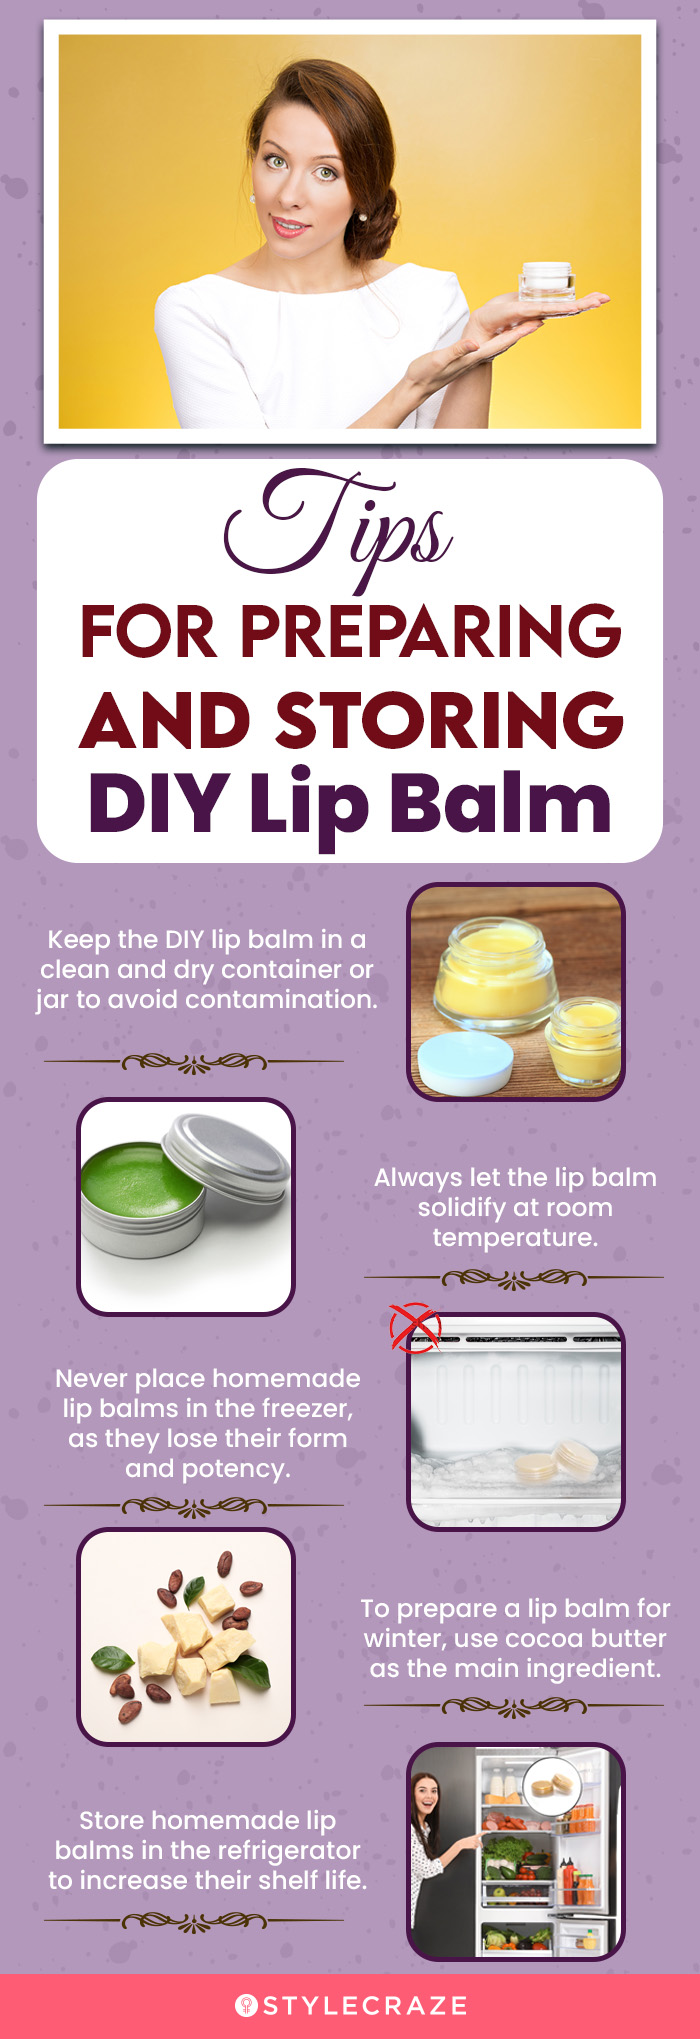 tips for preparing and storing diy lip balm (infographic)